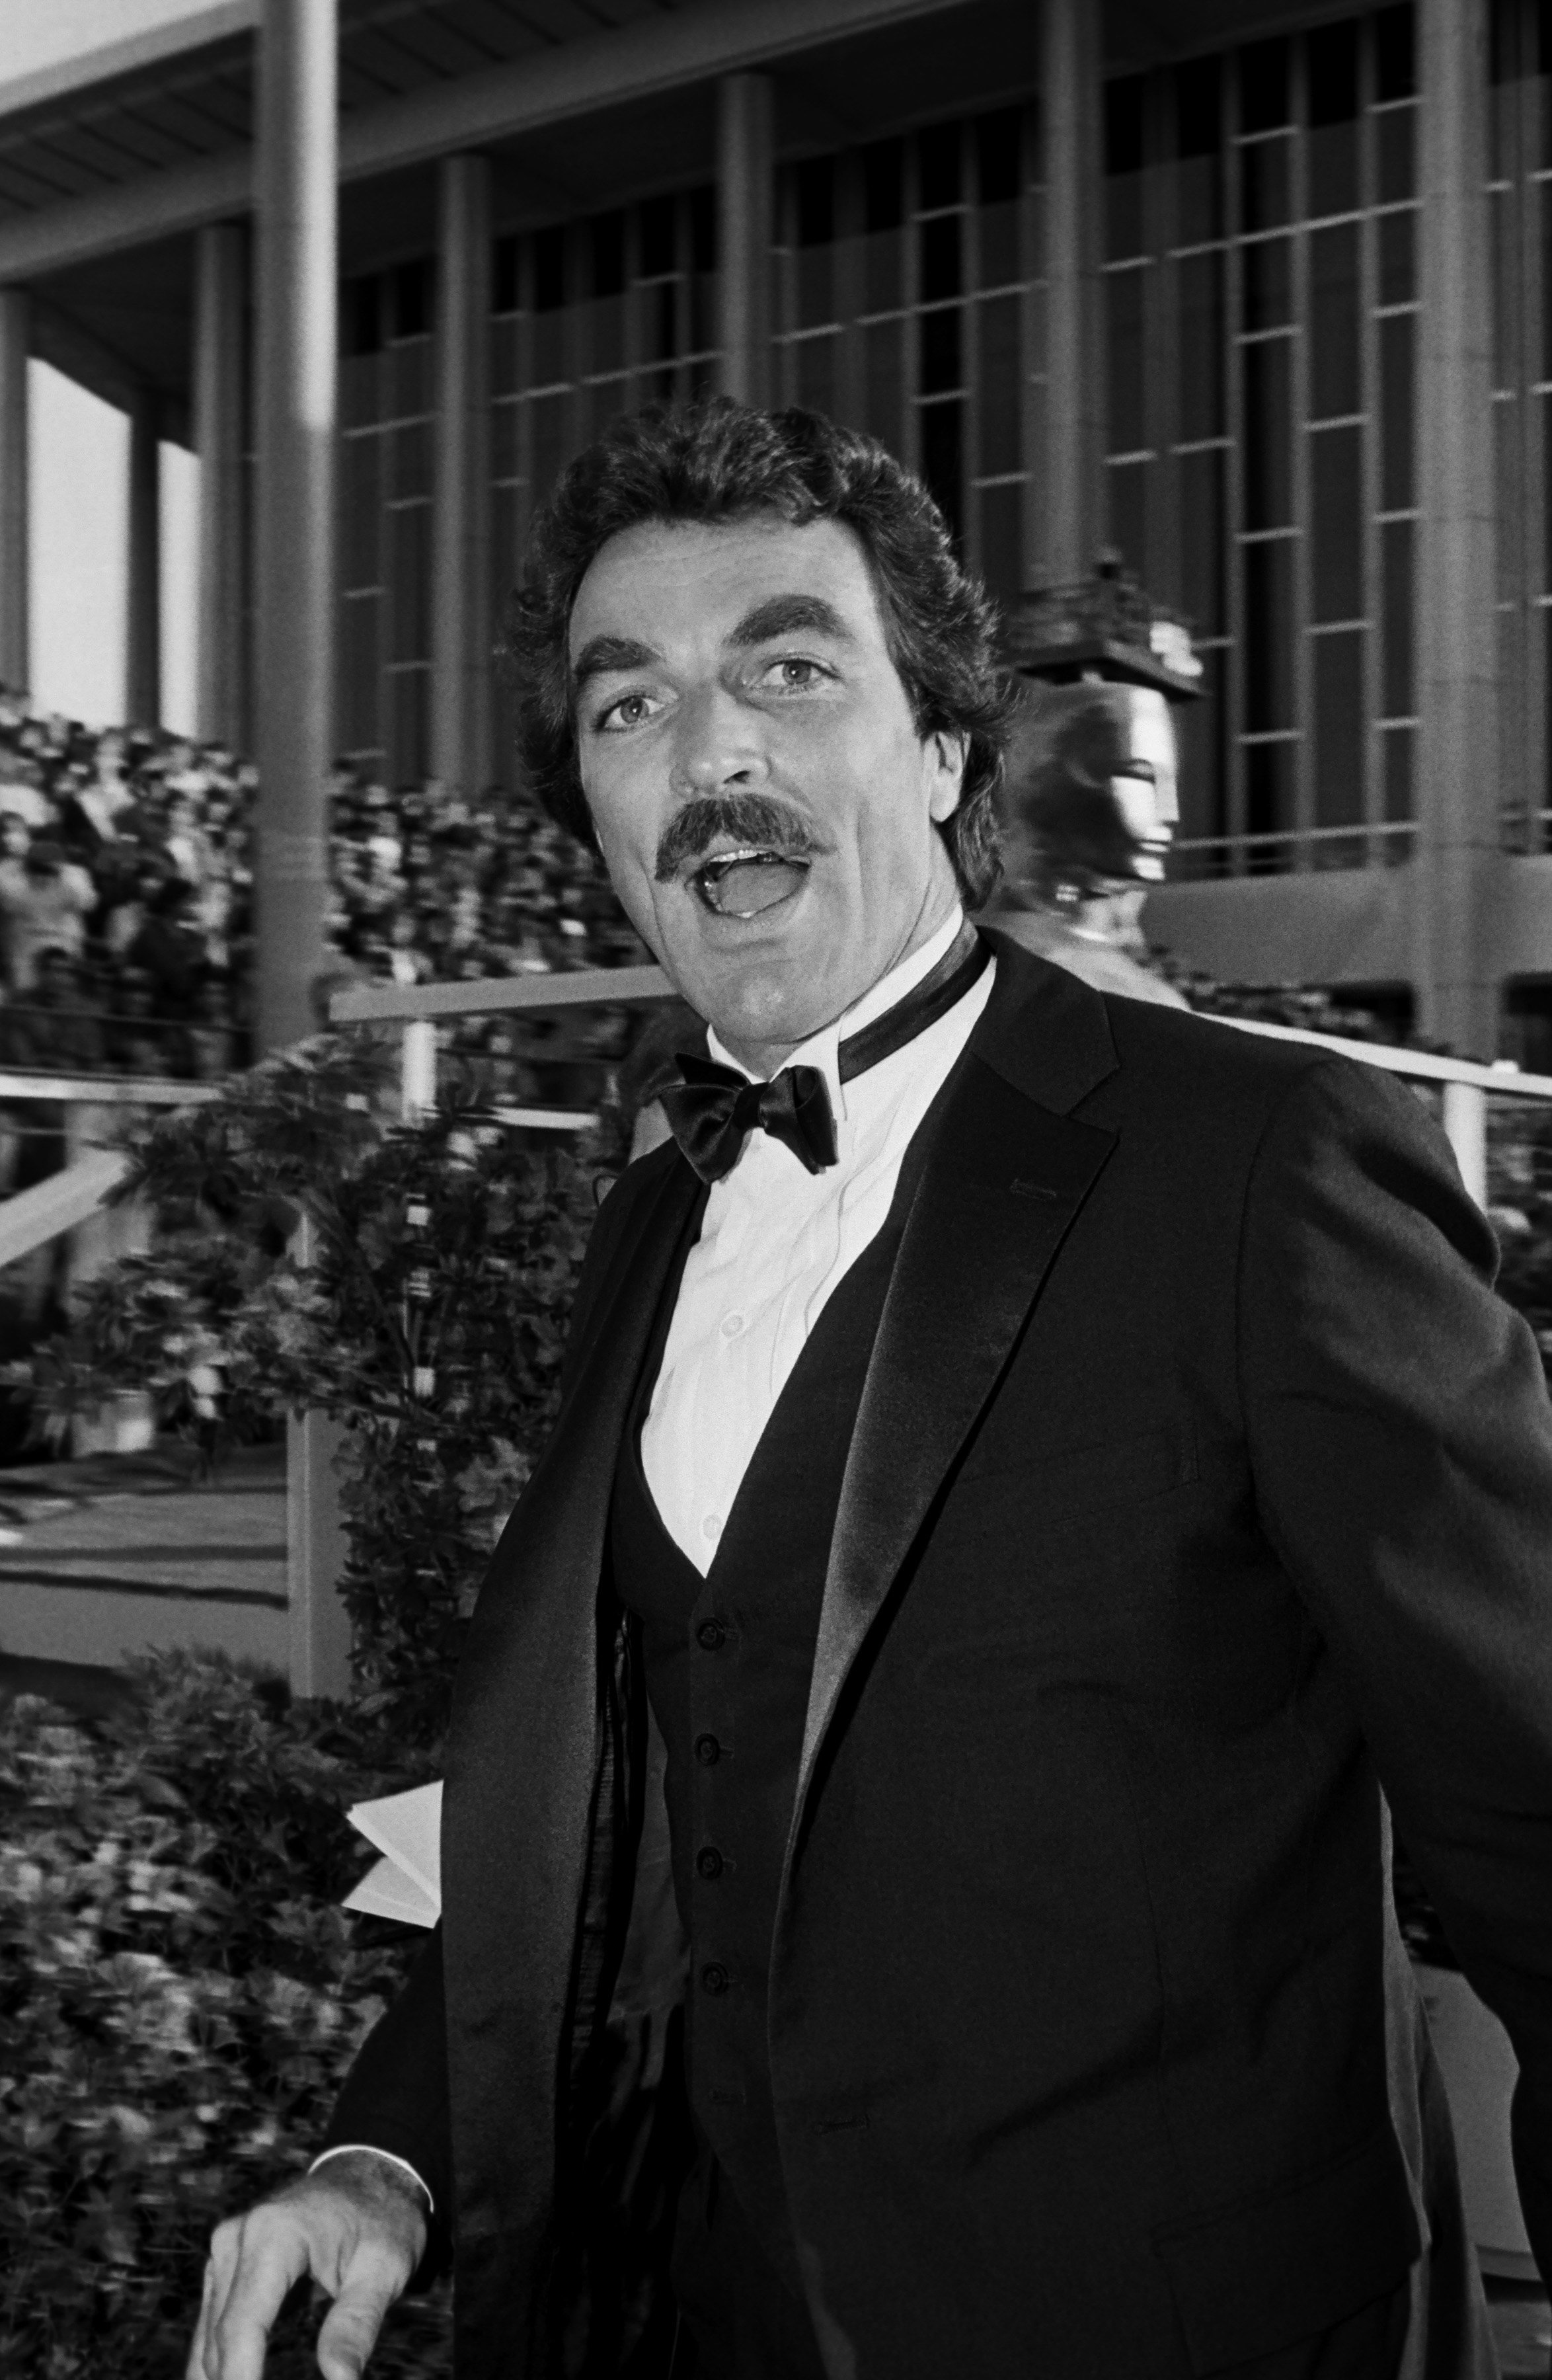 Tom Selleck at the  Academy Awards presentation in 1983 | Photo: GettyImages